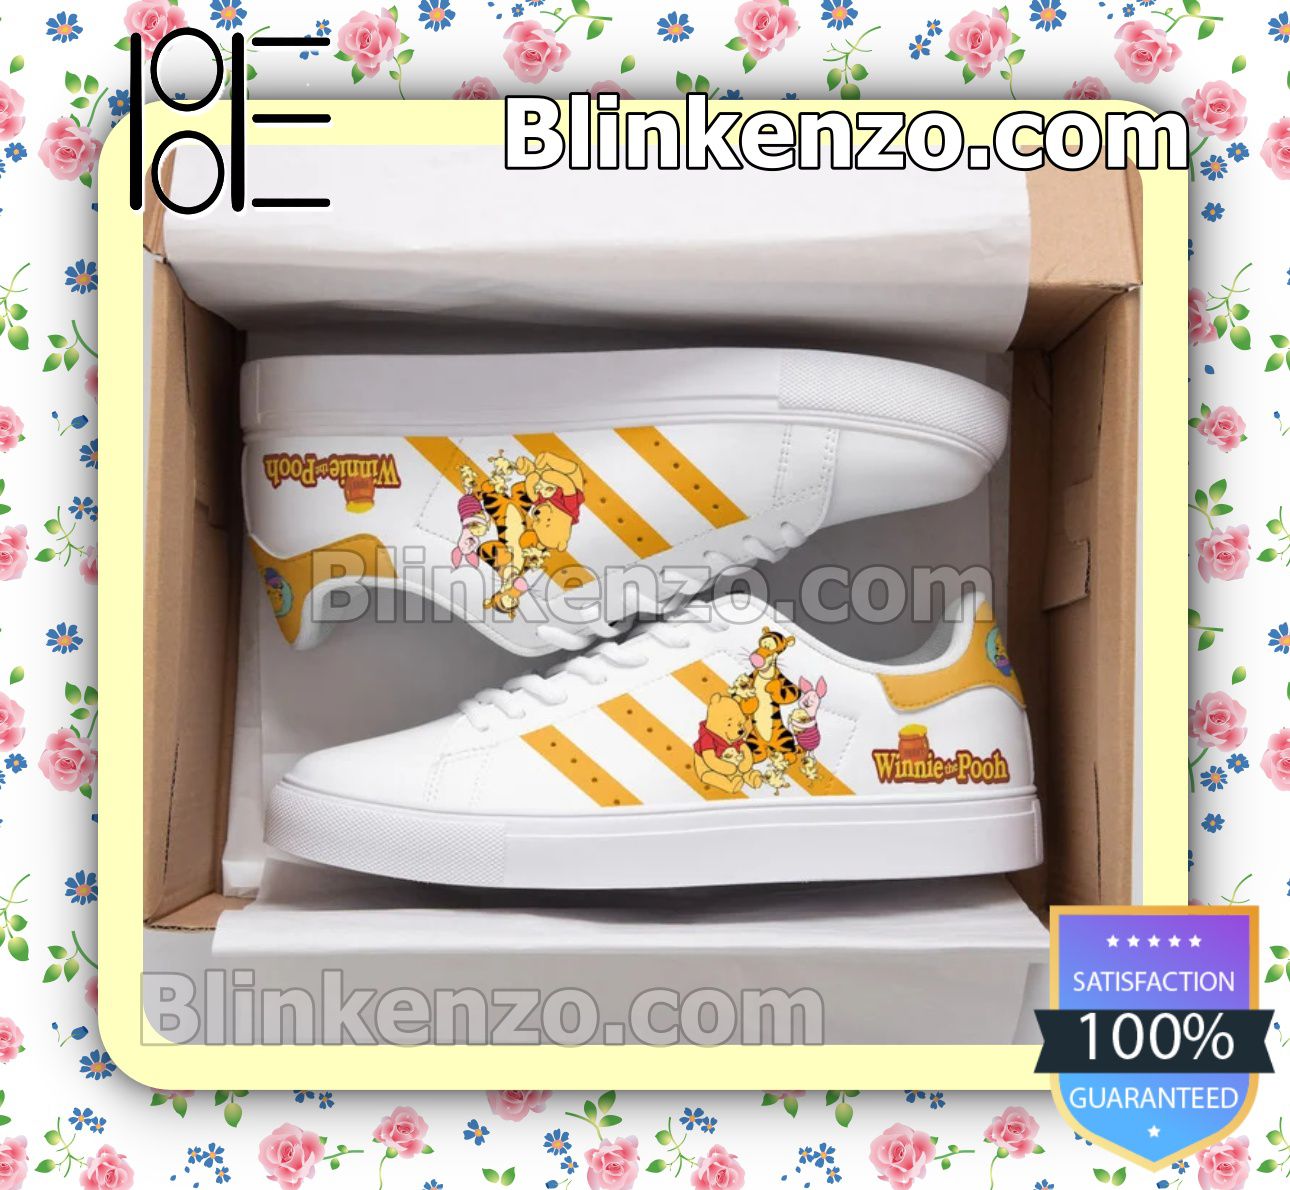 Sale Off Winnie The Pooh Women's Stan Smith Shoes